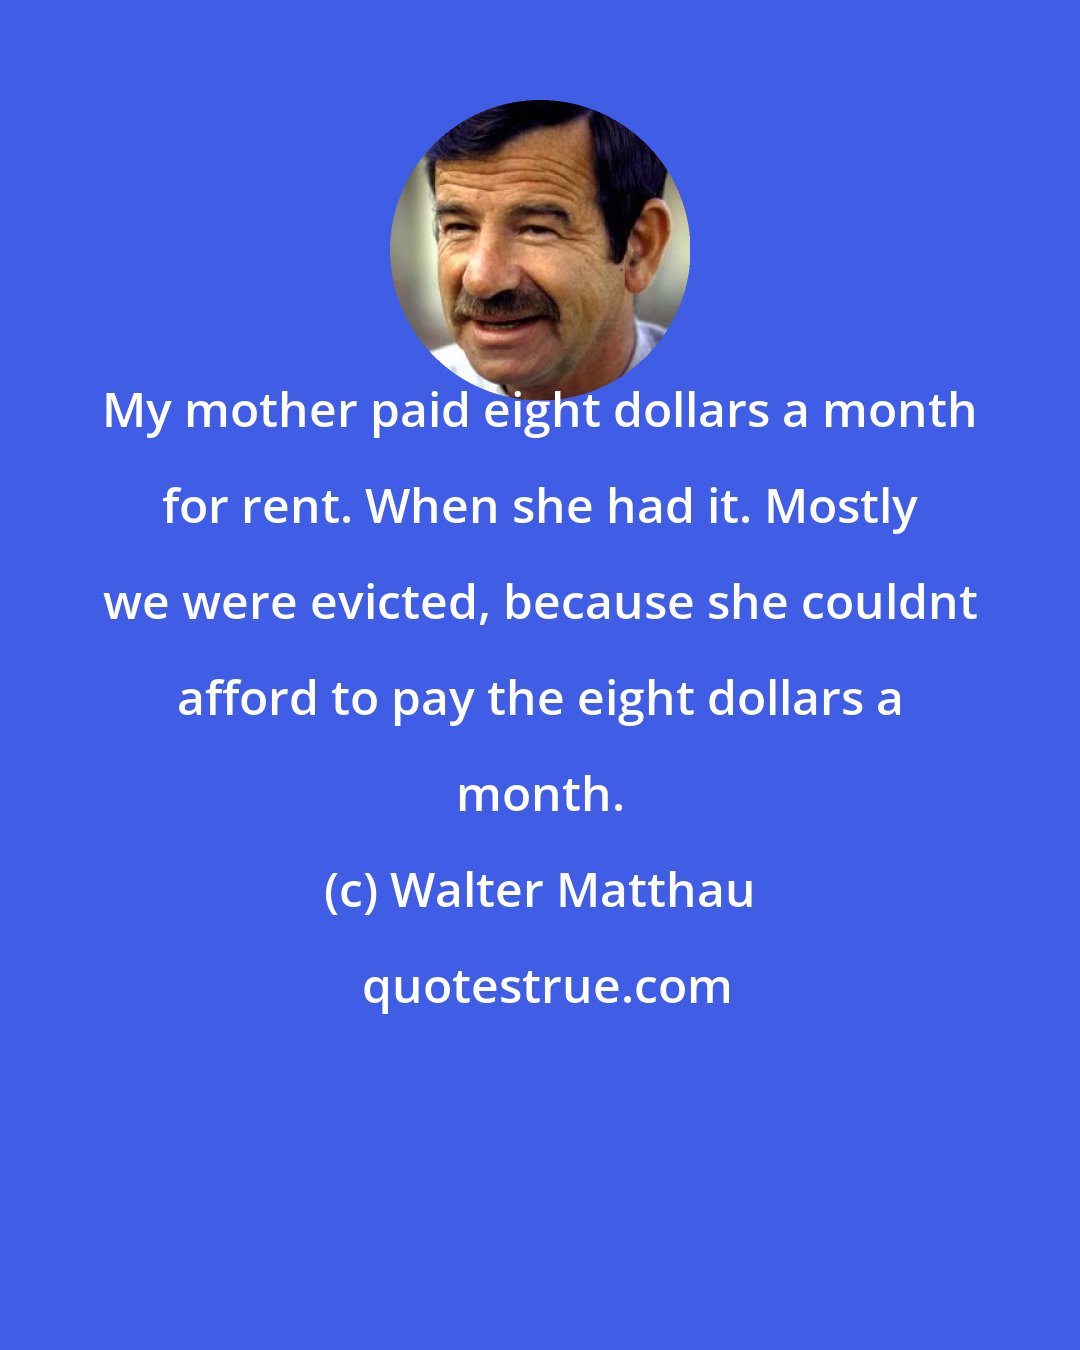 Walter Matthau: My mother paid eight dollars a month for rent. When she had it. Mostly we were evicted, because she couldnt afford to pay the eight dollars a month.